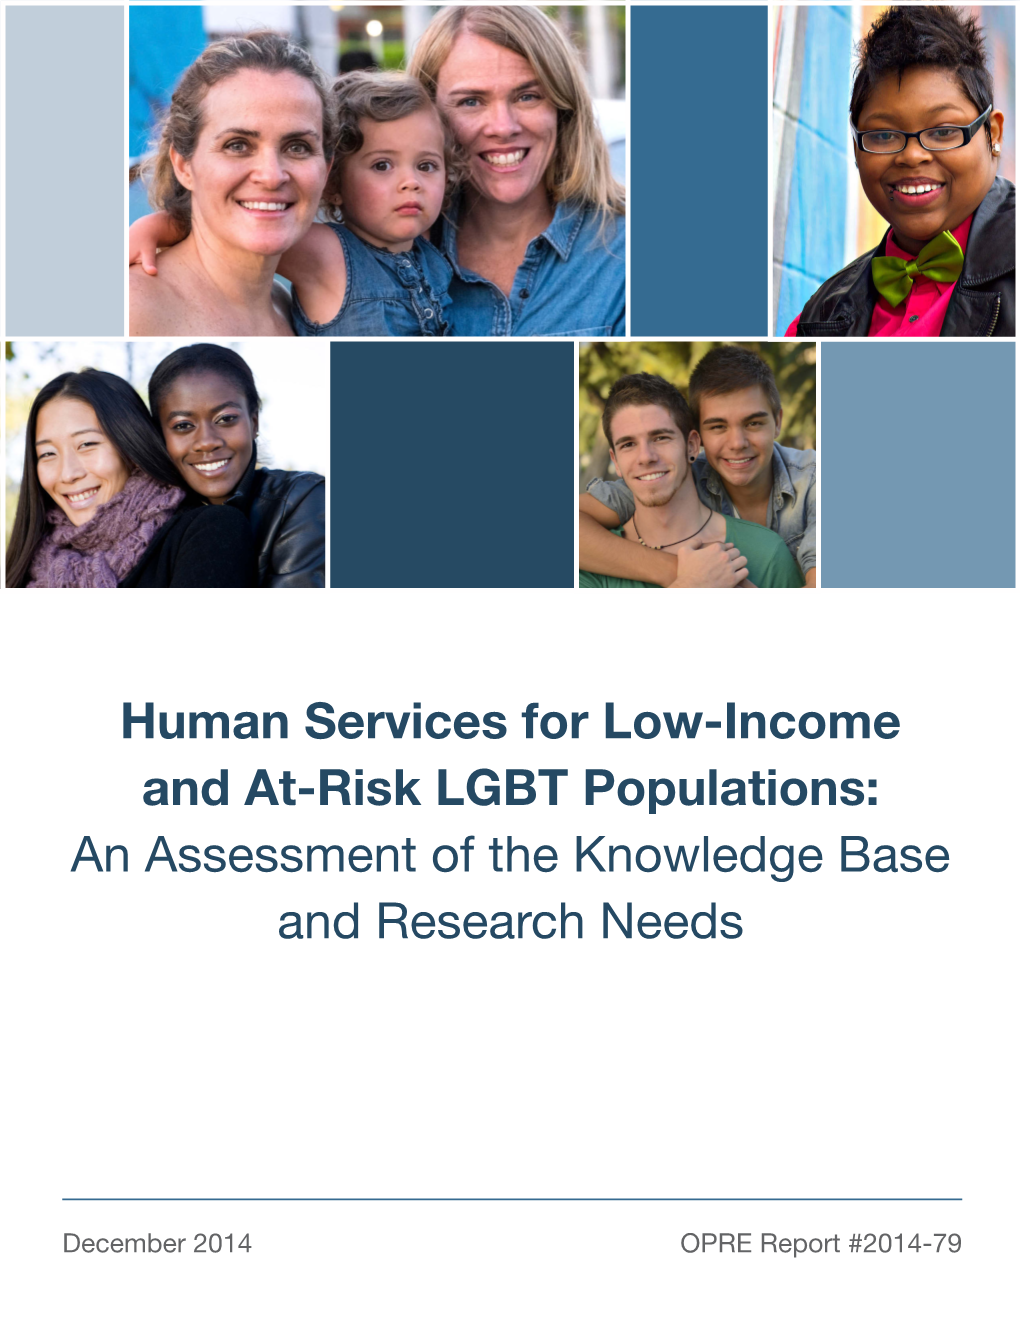 Human Services for Low-Income and At-Risk LGBT Populations: an Assessment of the Knowledge Base and Research Needs